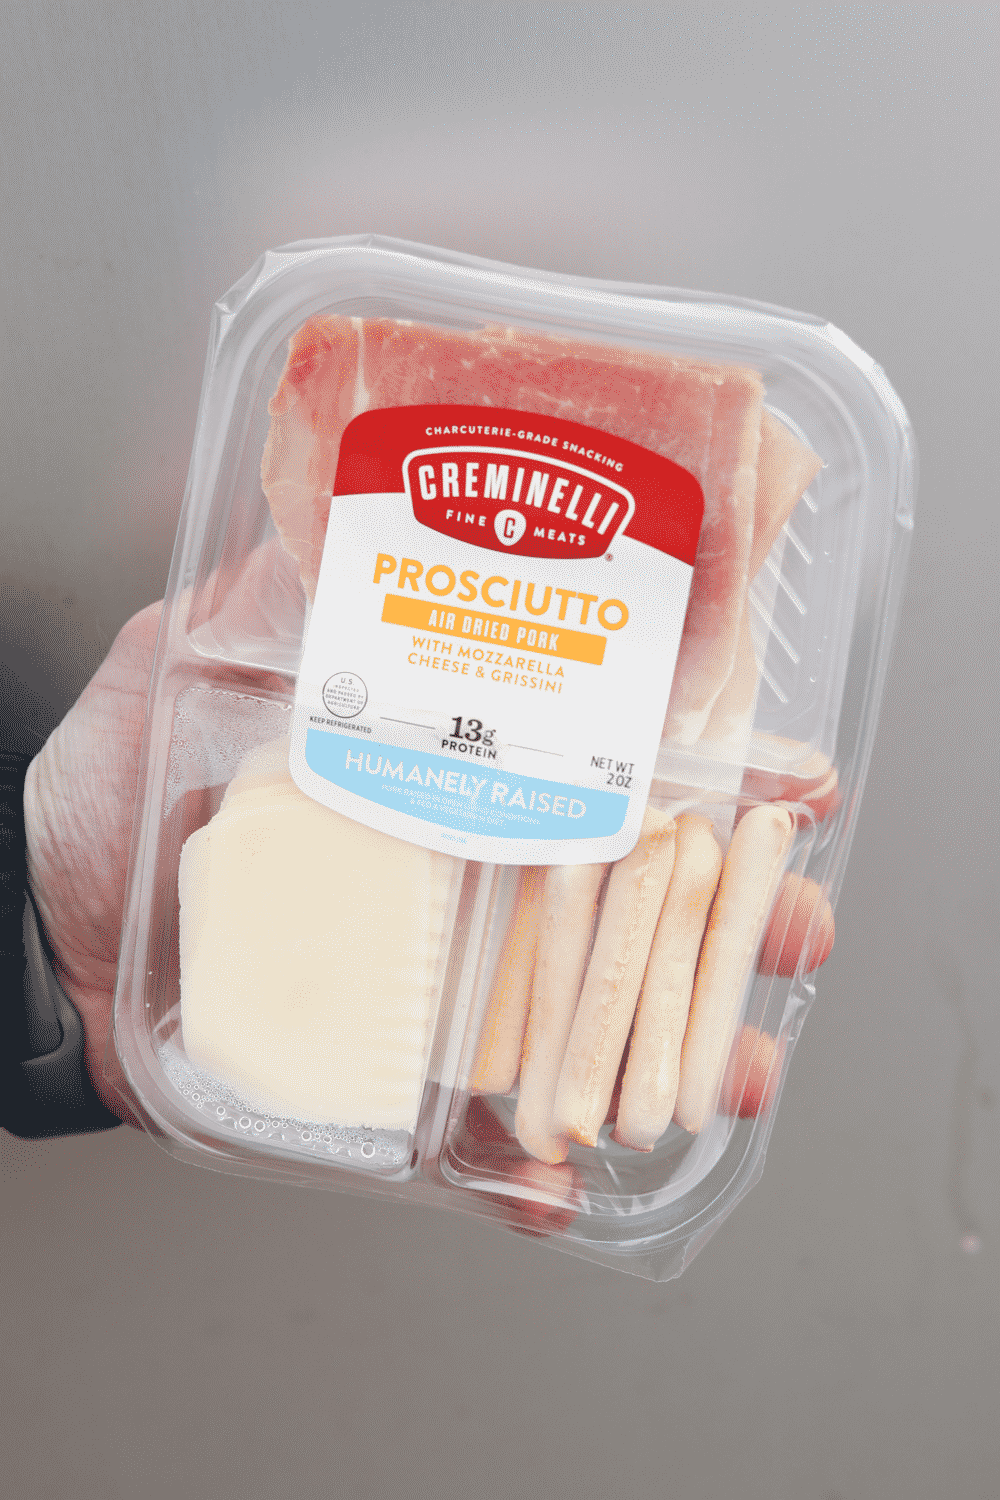 A hand holding a container of prosciutto, cheese and grissini.